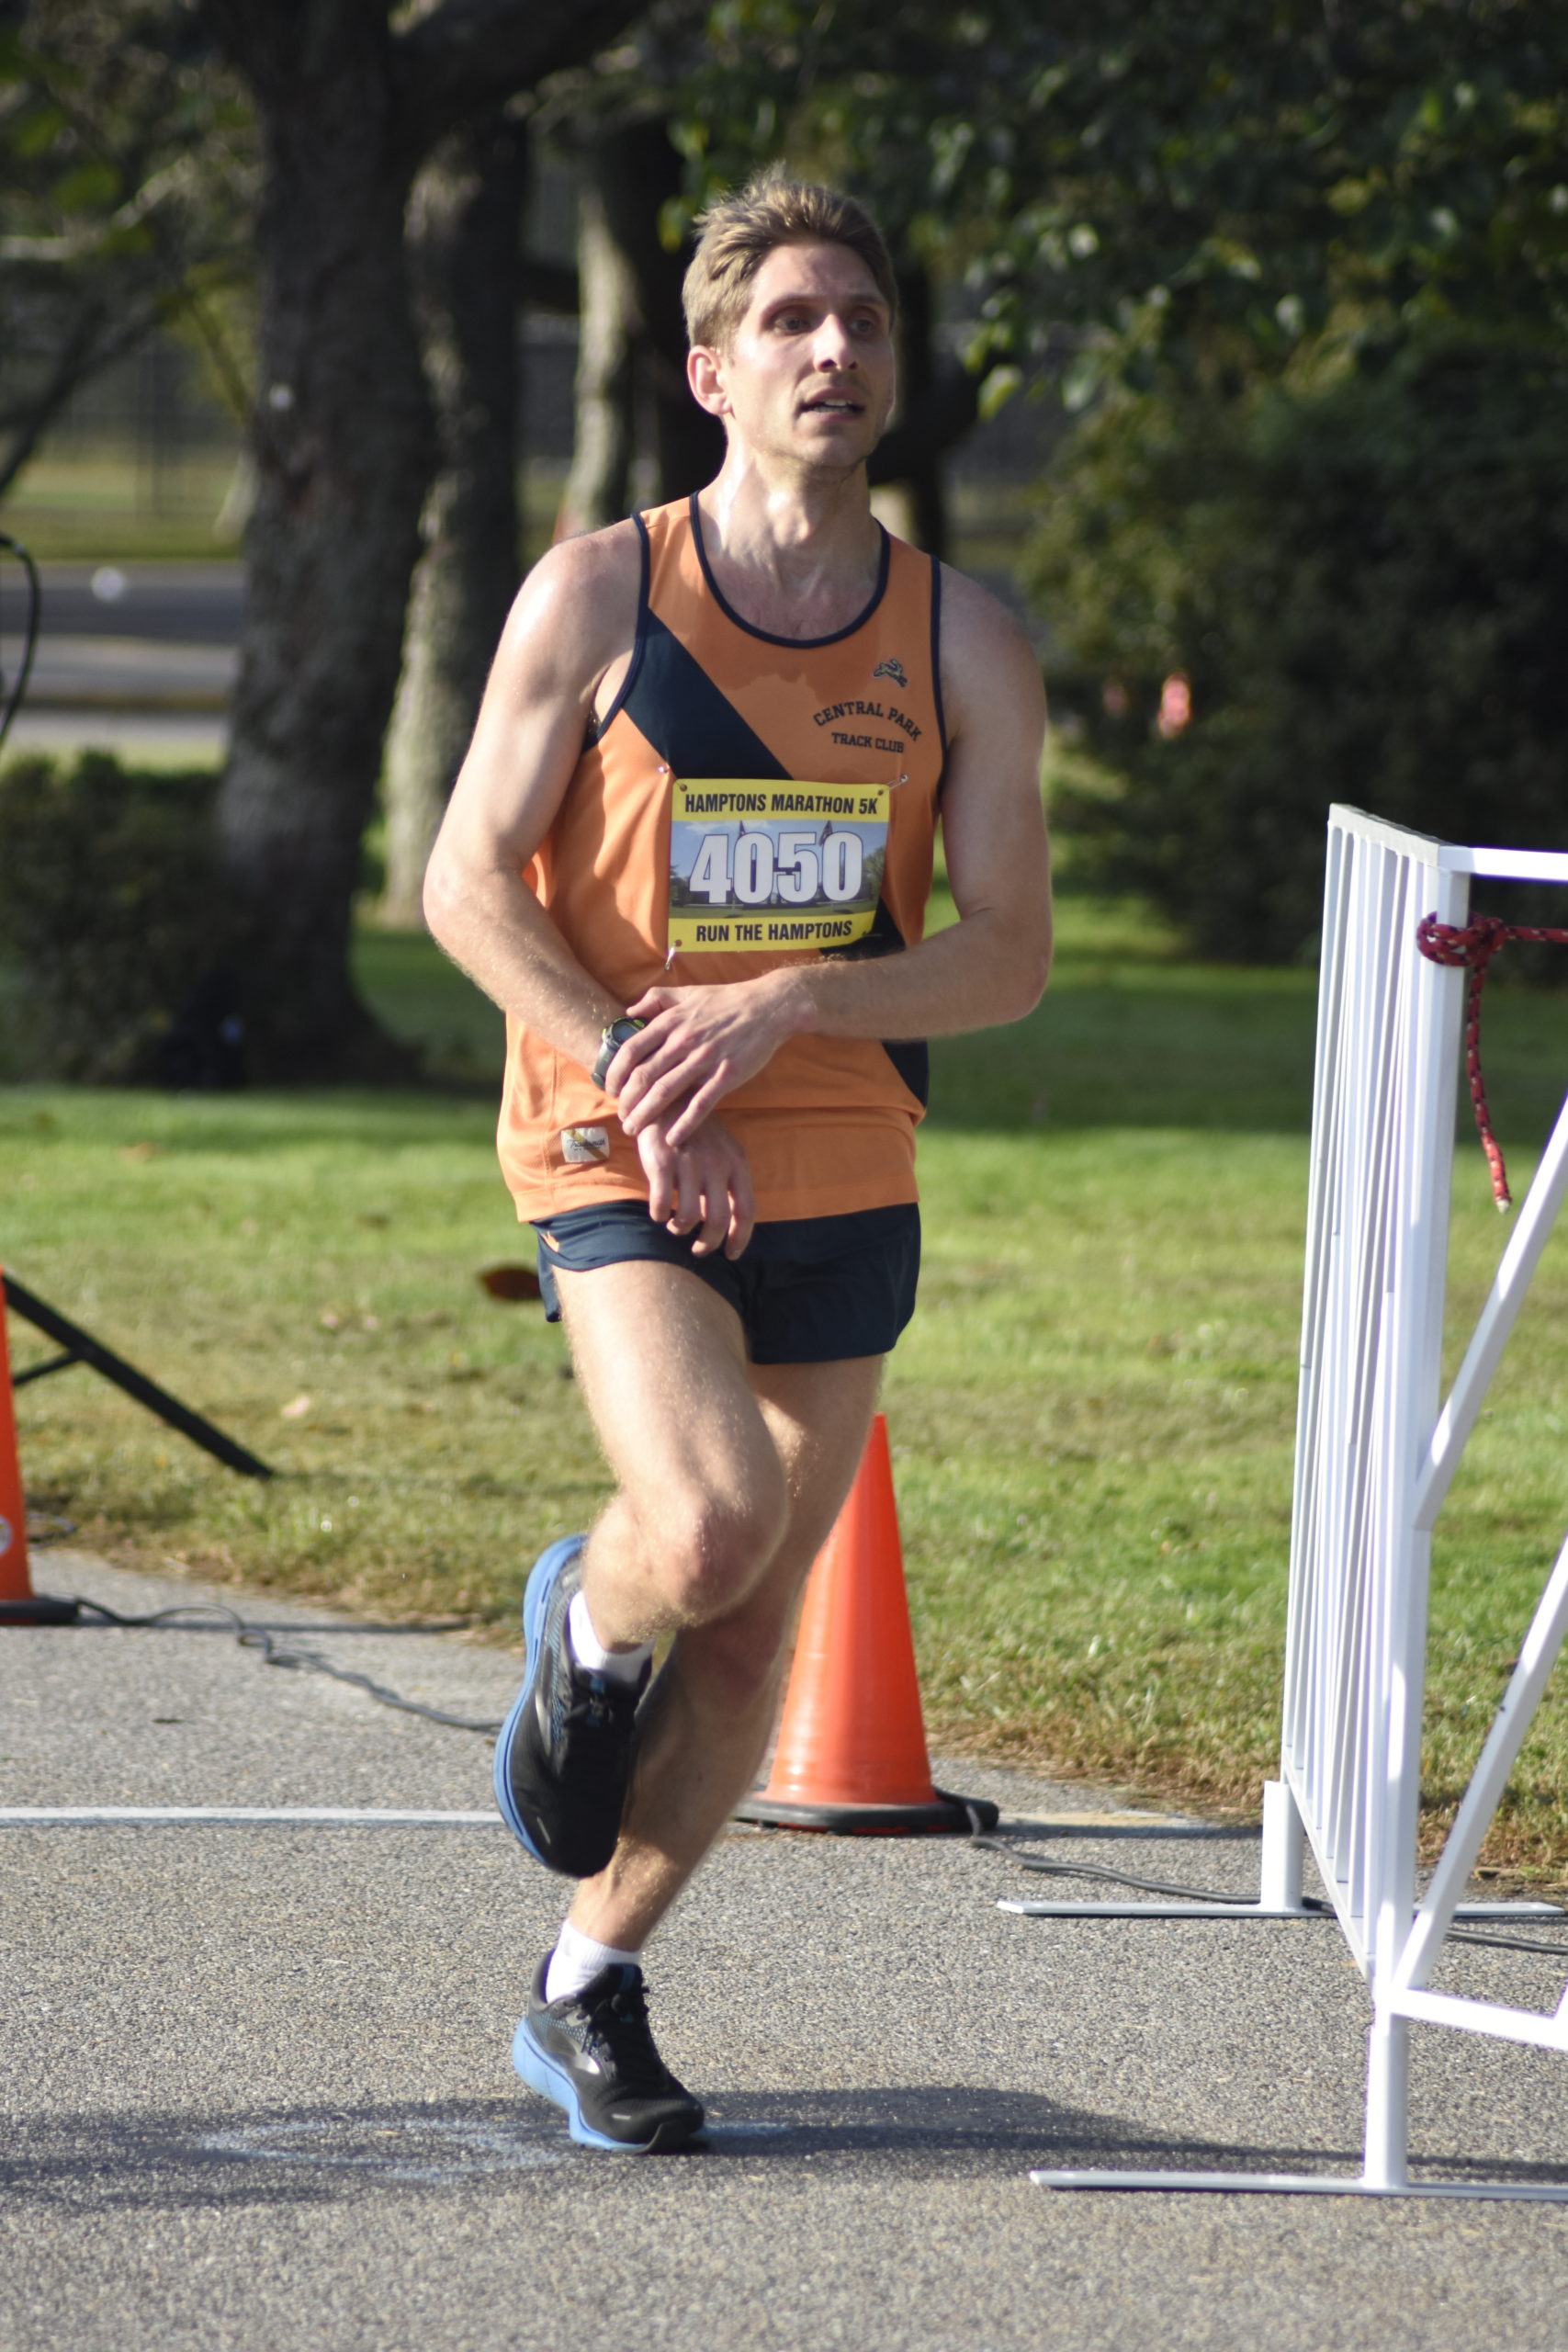 Will Friedlander of New York City placed second overall in the 5K.